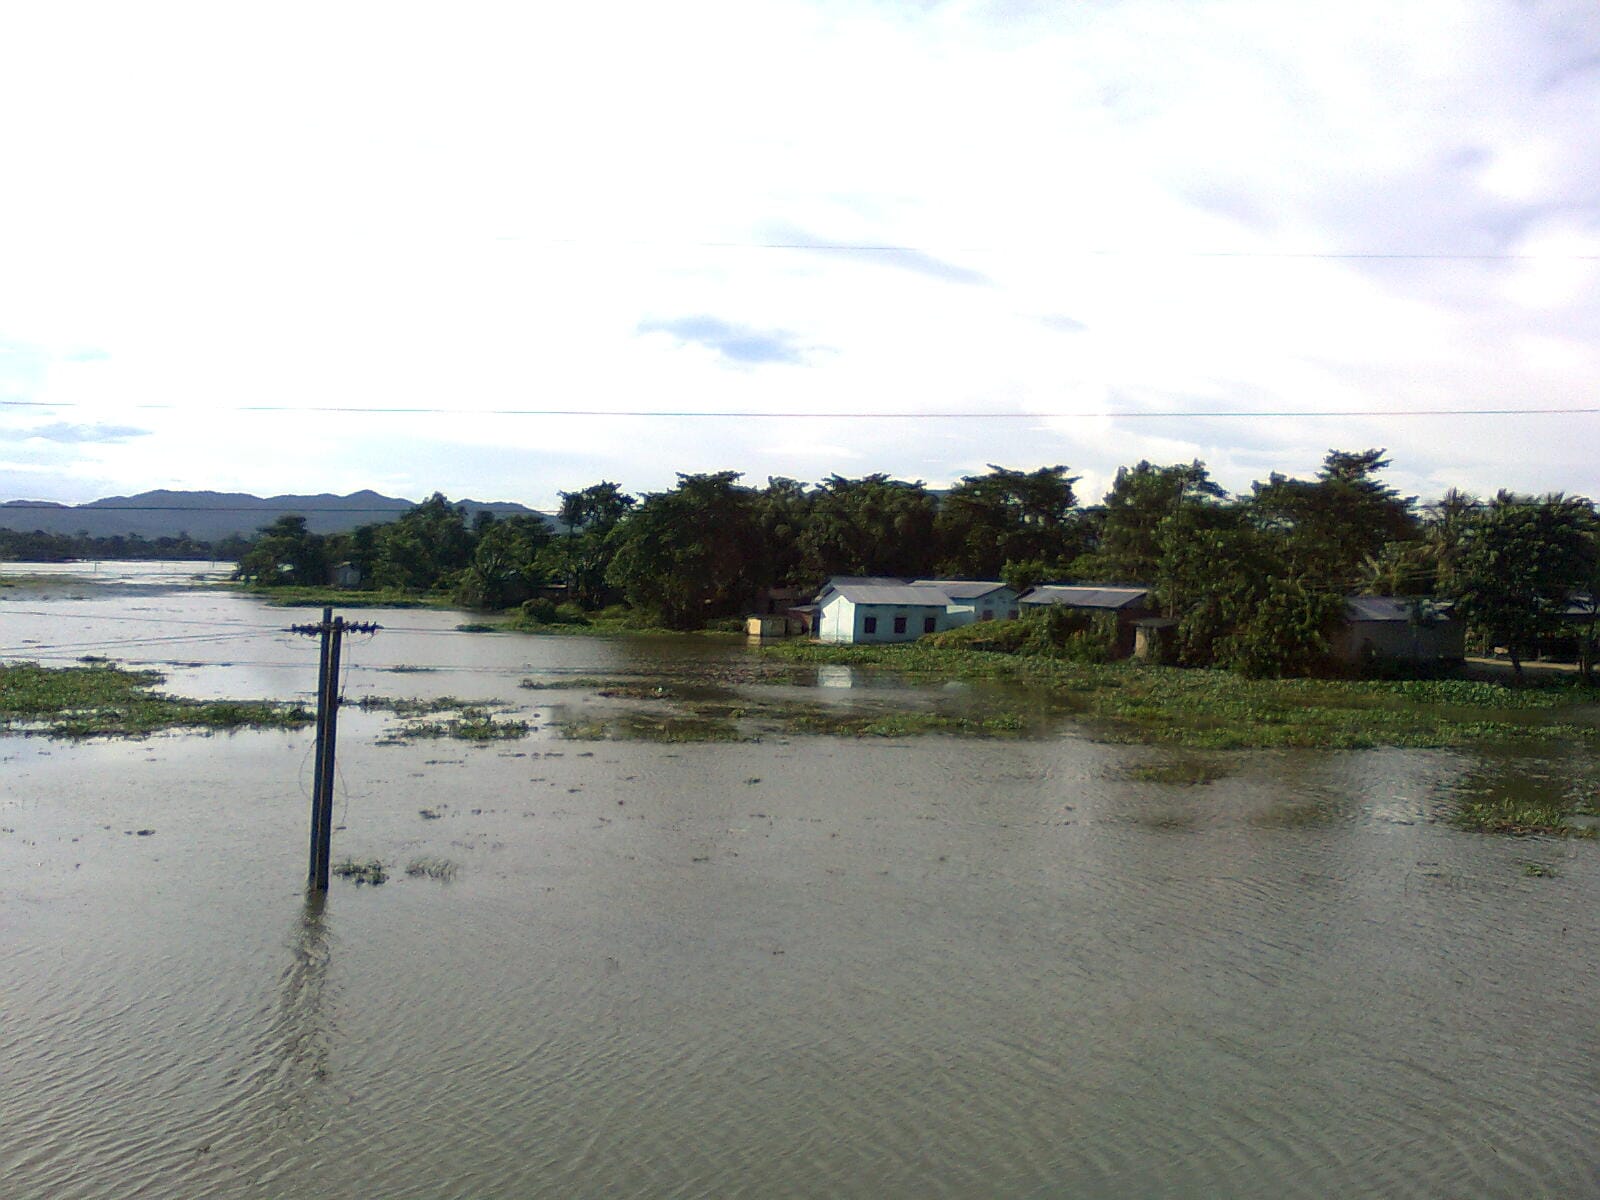 Towns and roads are underwater throughout most of the state of Assam, where the Brahmaputra river runs. Photo: PP Yoonus/Wikimedia Commons